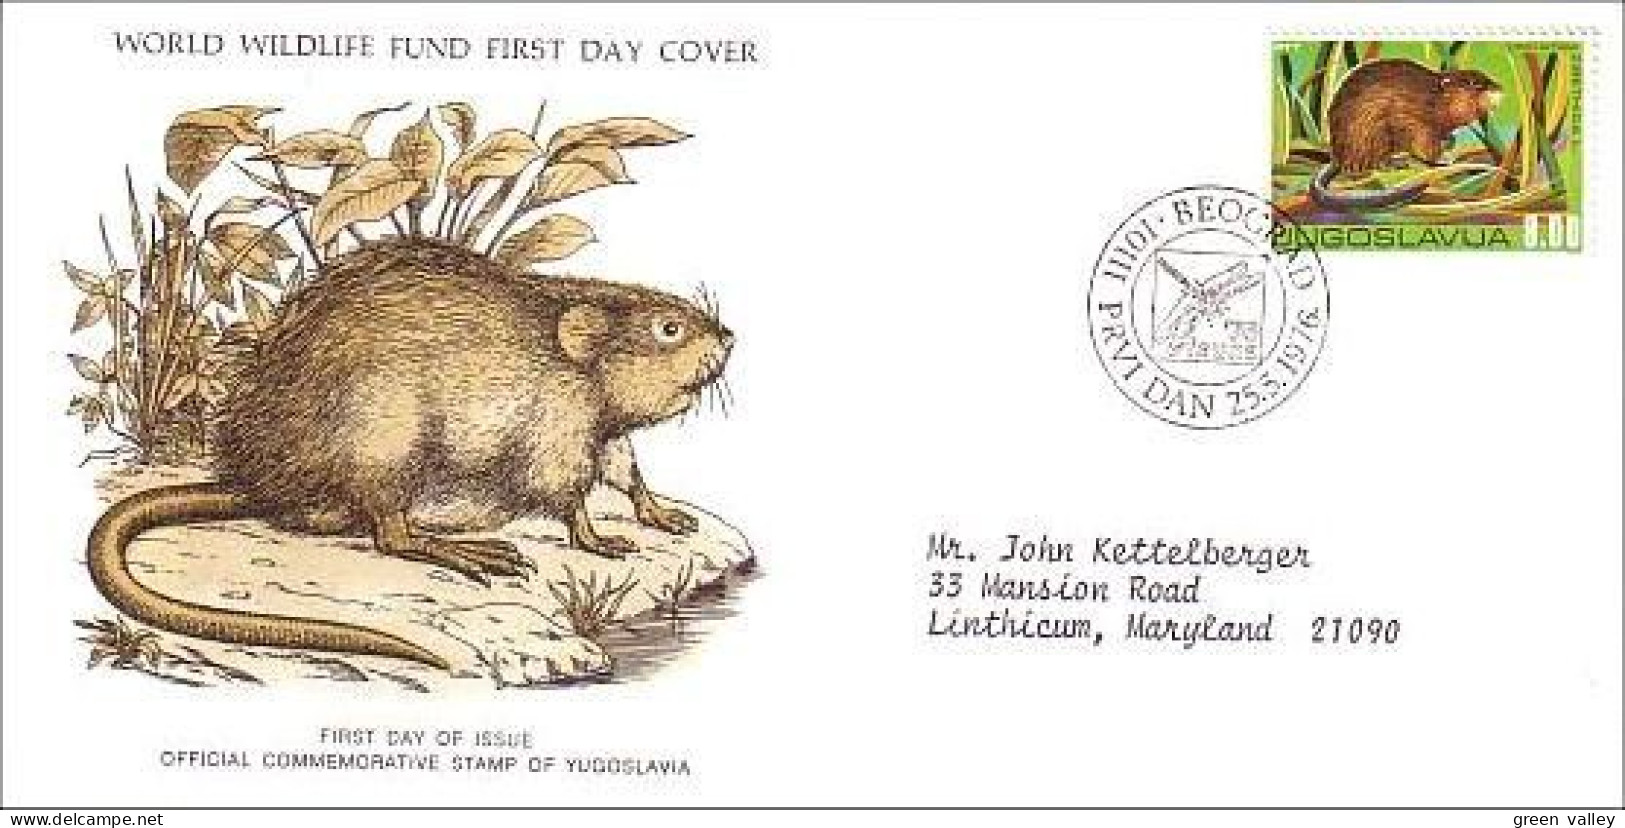 Yougoslavie Rongeur Ondatra Rodent WWF FDC Cover ( A80 99) - Roditori